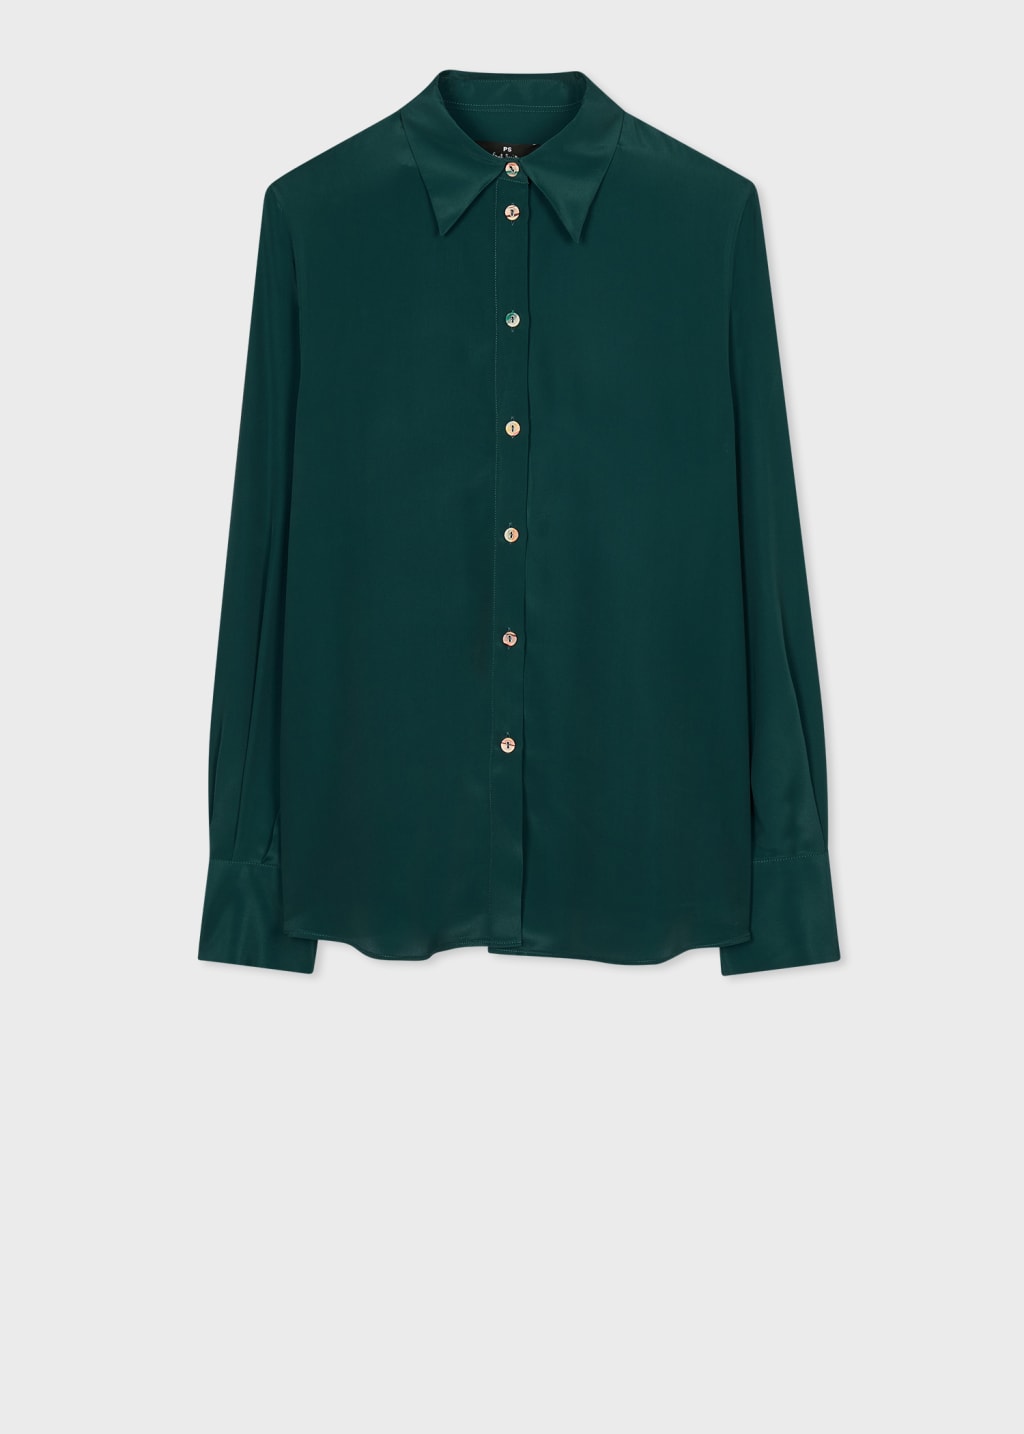 Front View - Women's Teal Silk-Blend Blouse Paul Smith